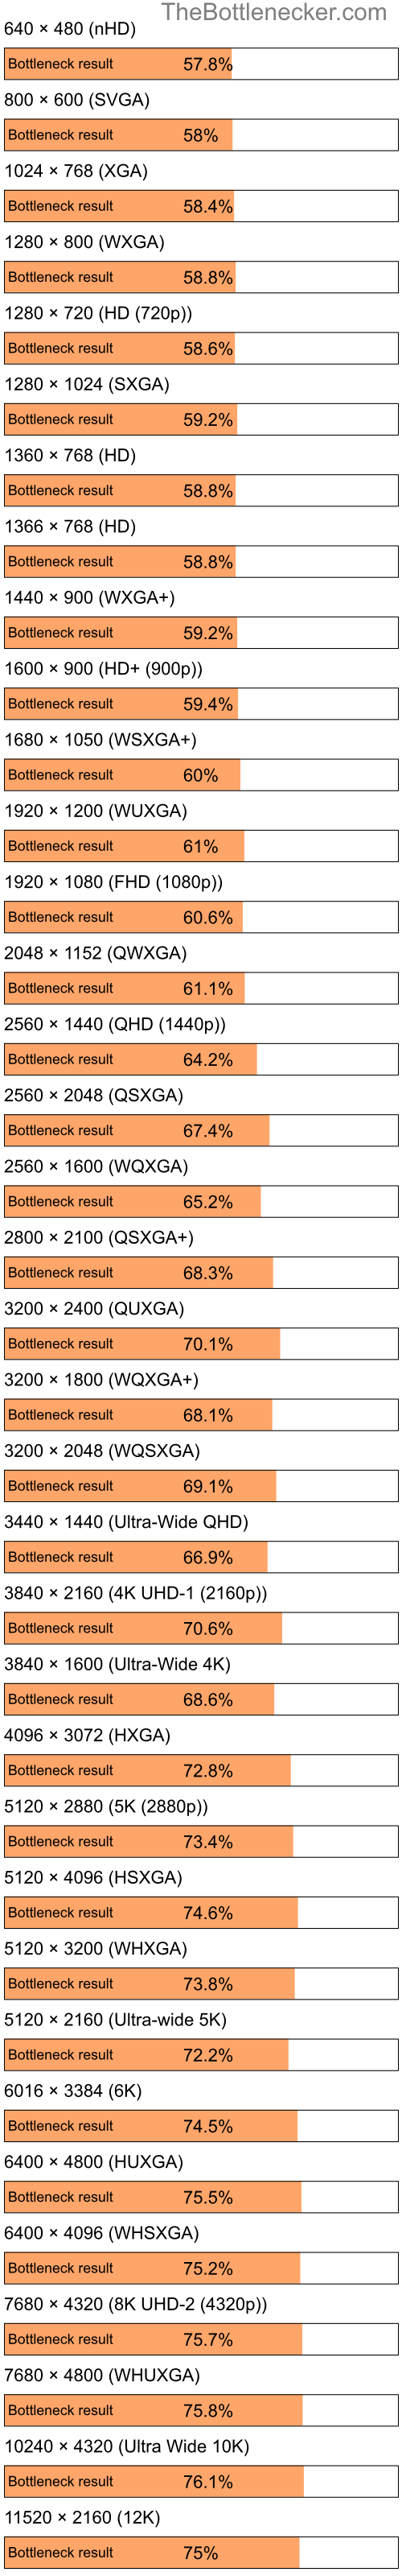 Bottleneck results by resolution for Intel Celeron M 420 and NVIDIA Quadro FX 540 in Processor Intense Tasks